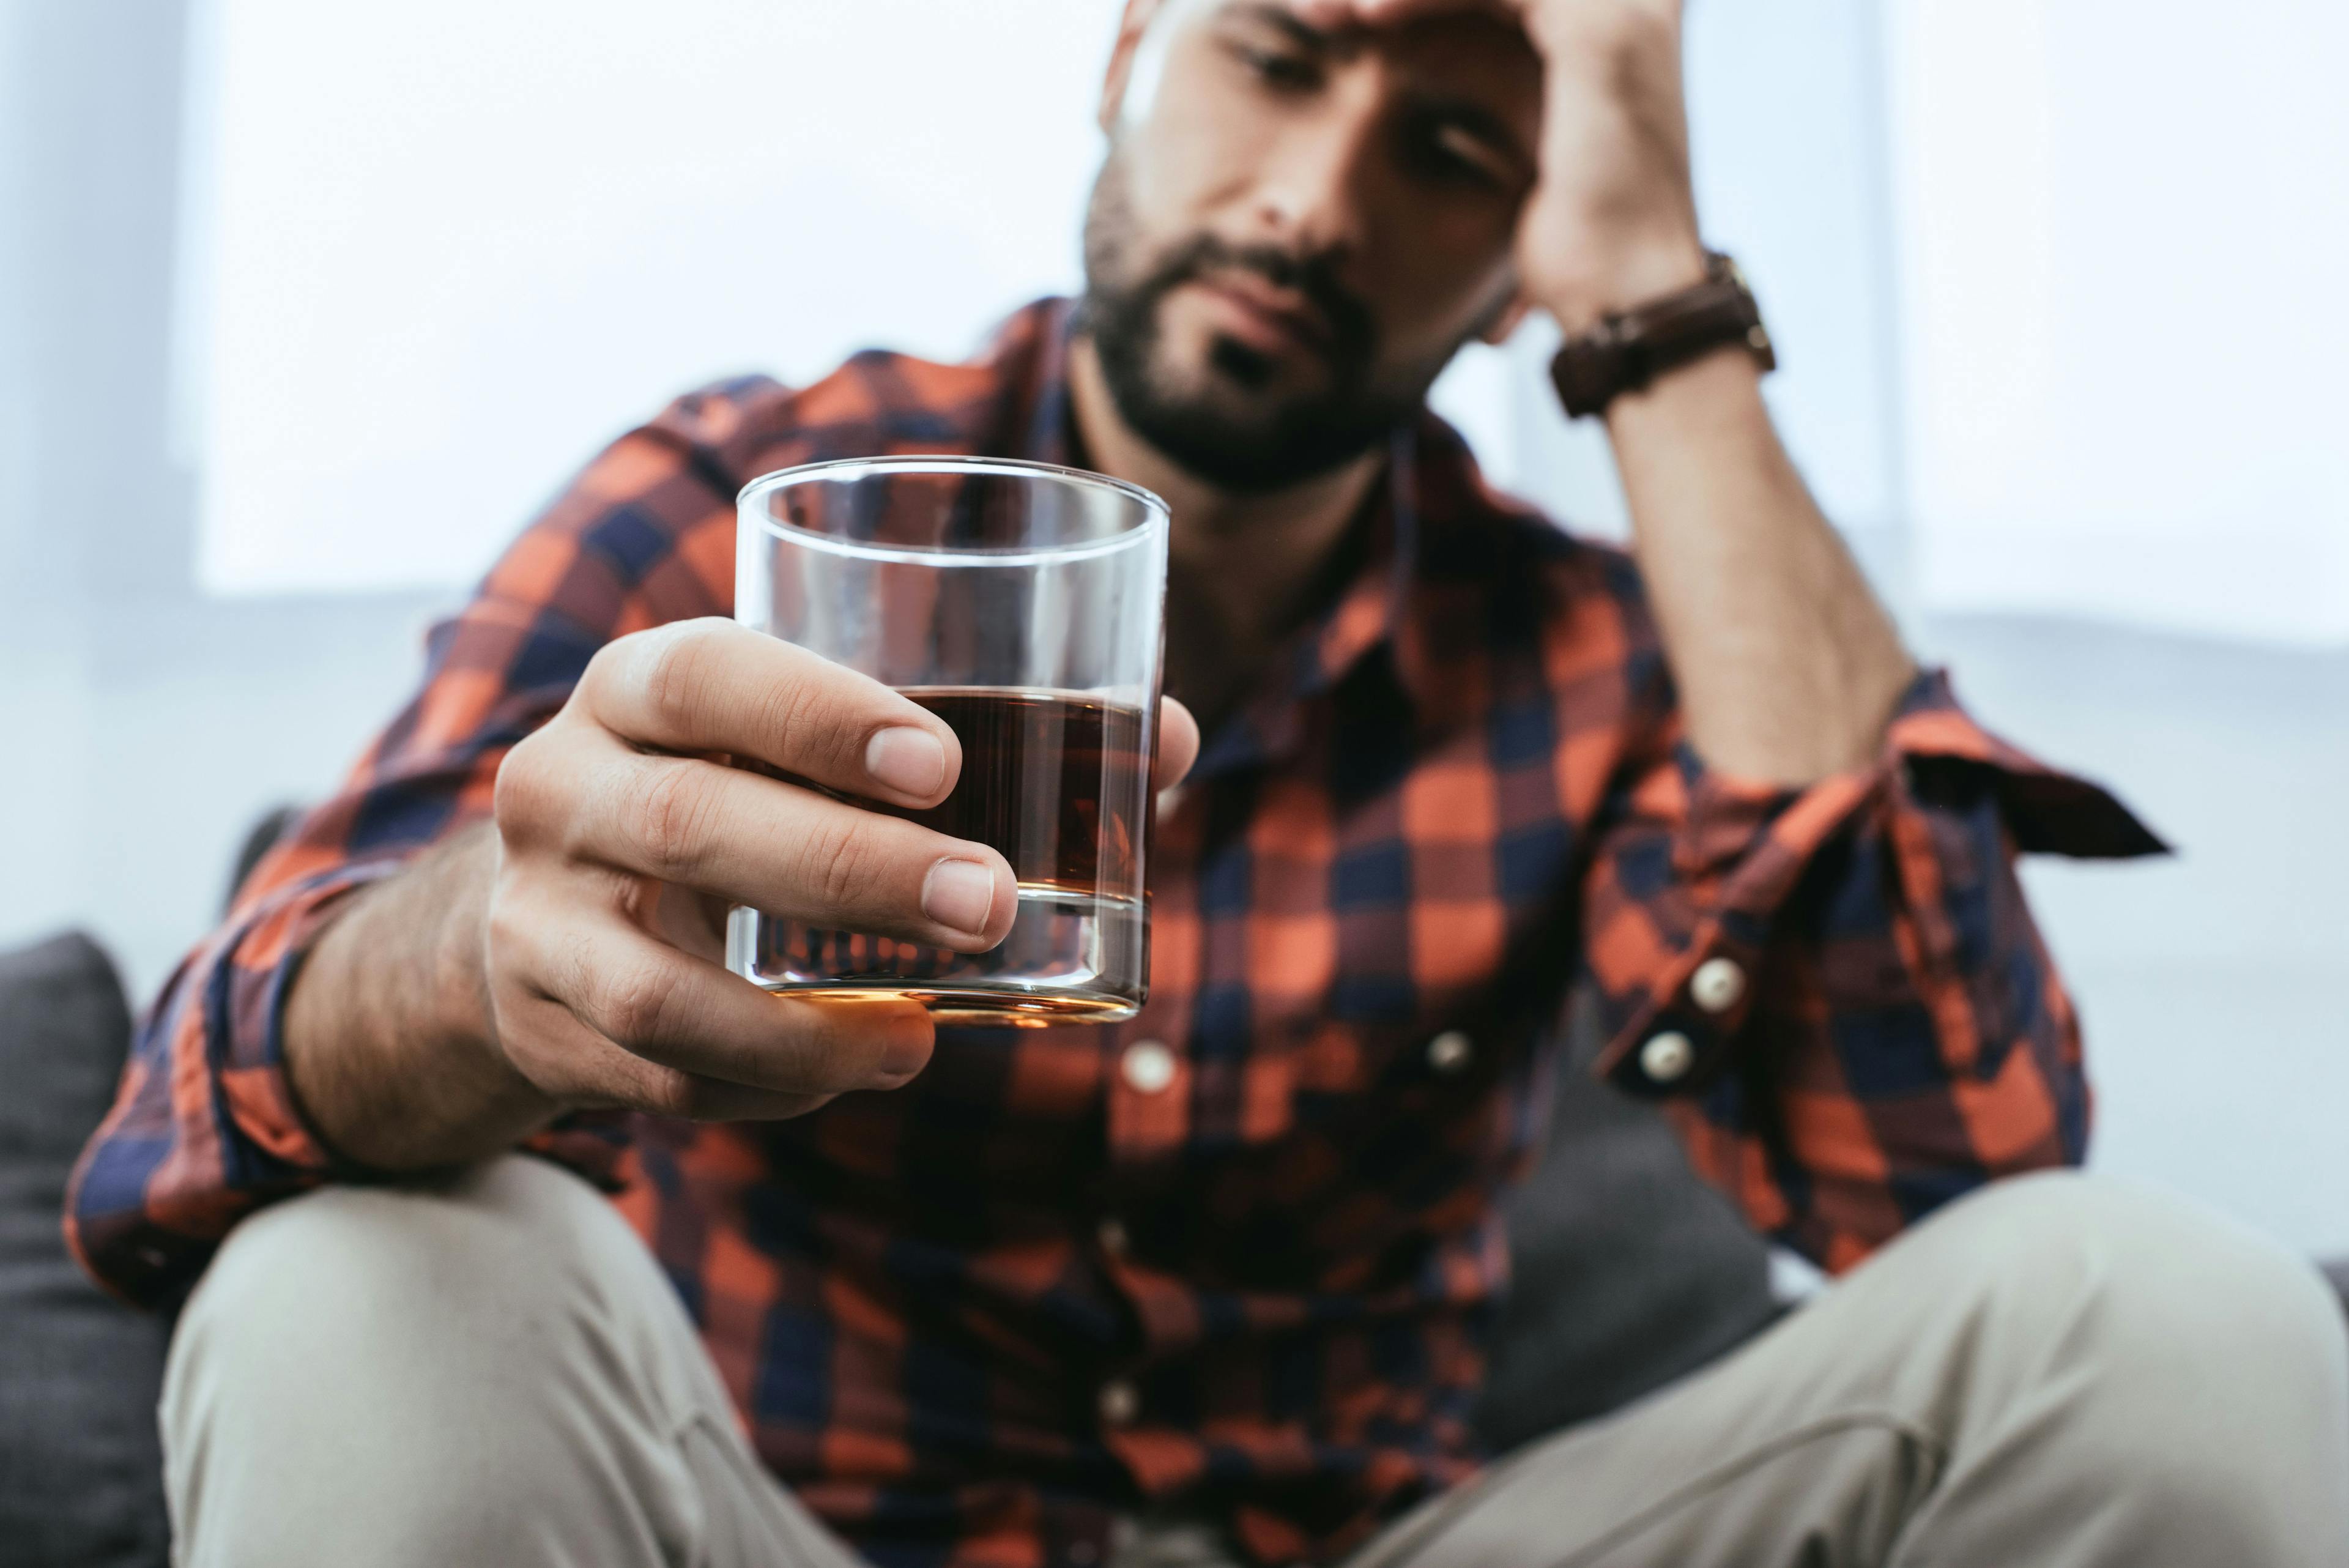 Upcoming Release of Phase 3 Trial Results for Medication Treating Alcohol Use Disorder